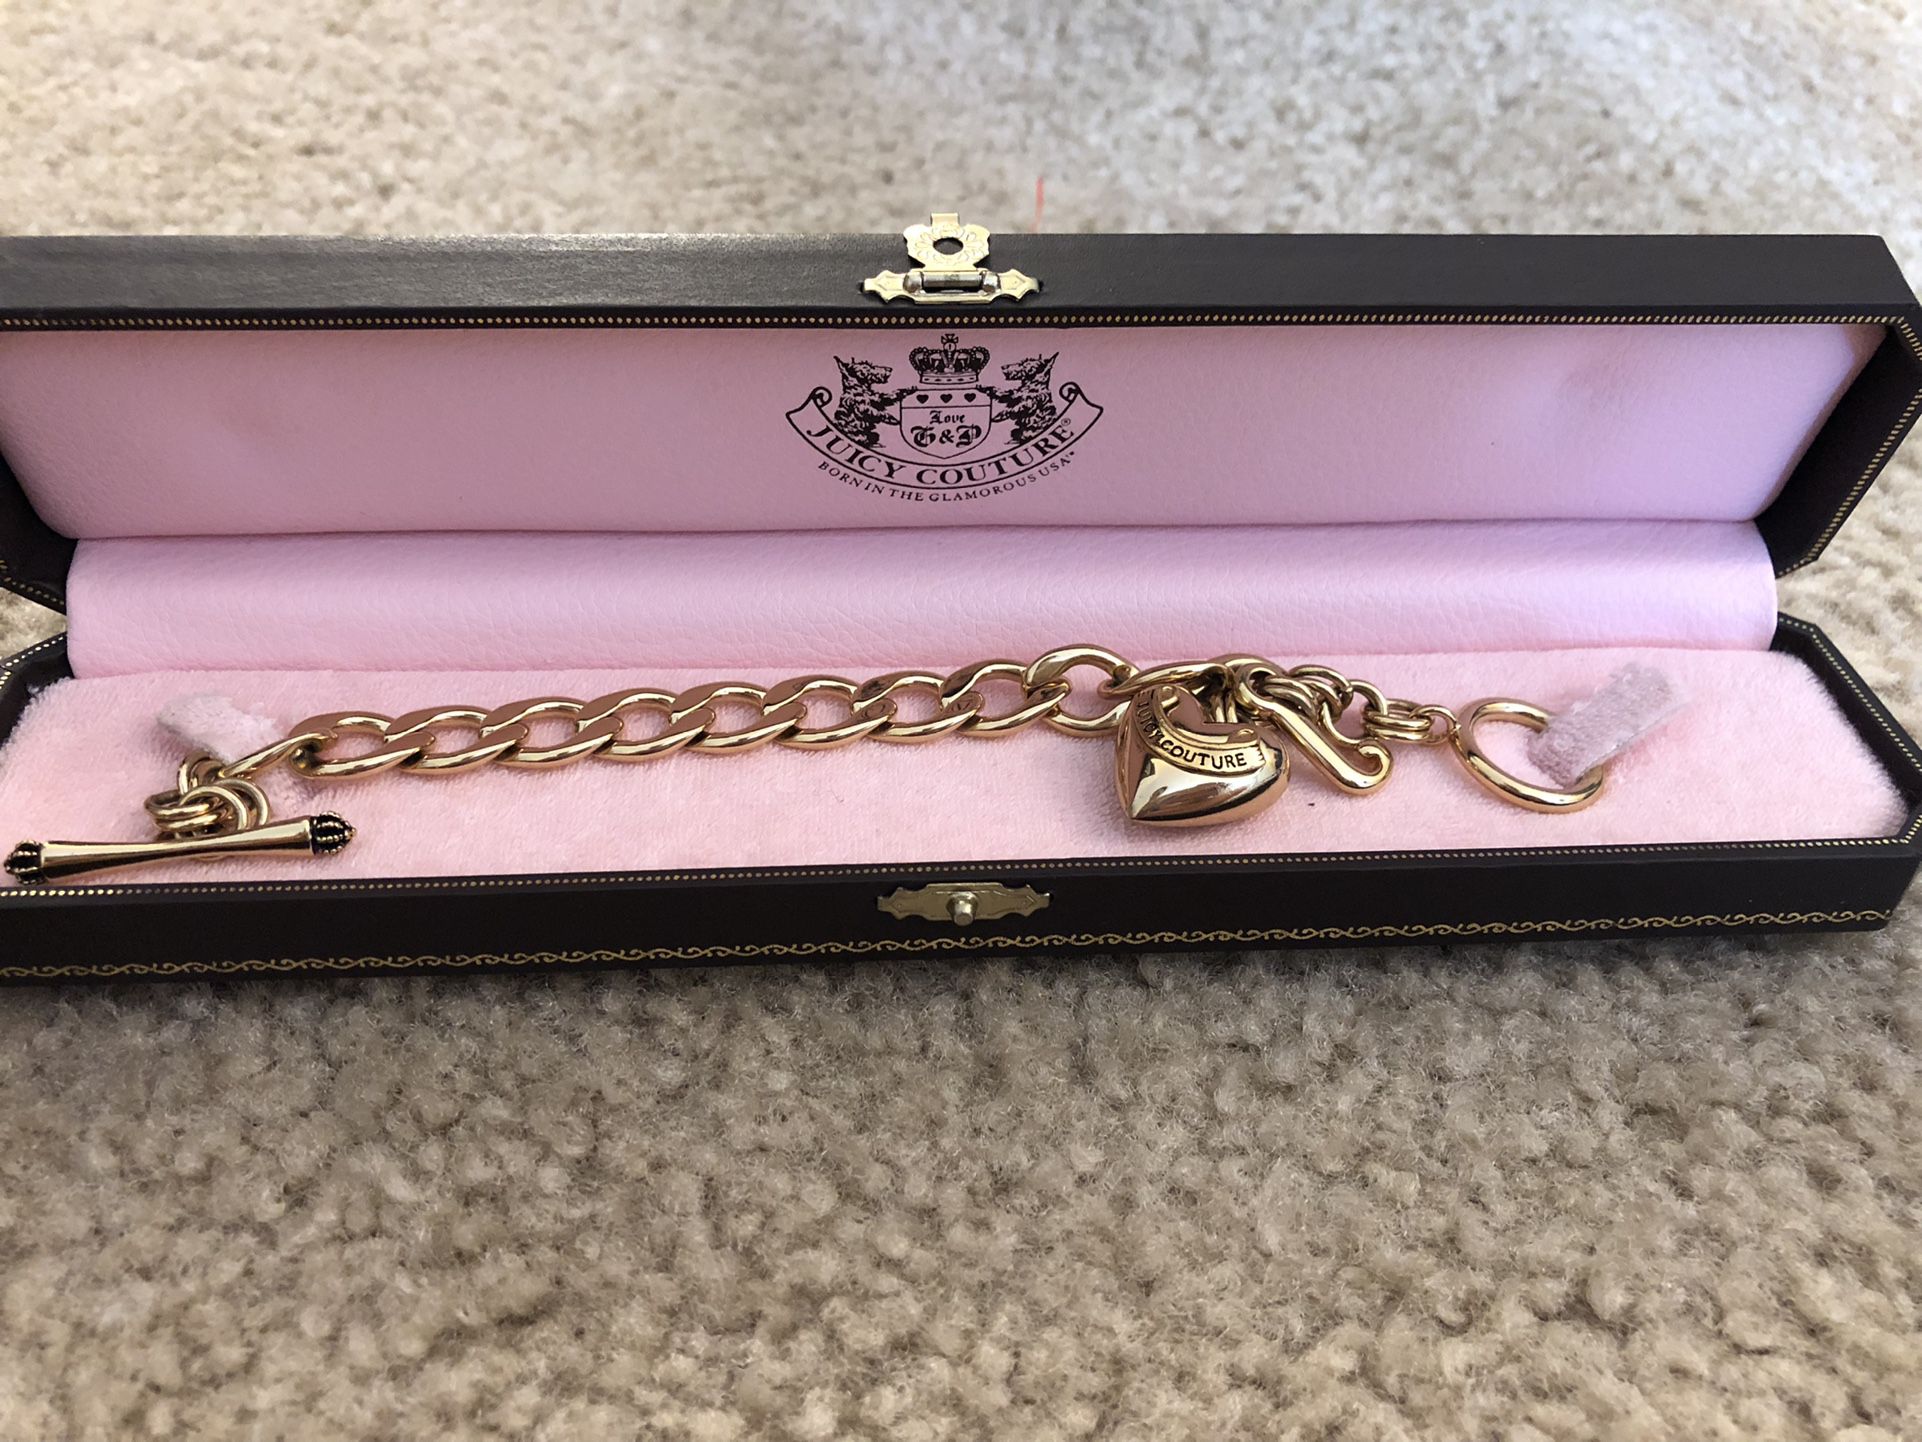 Juicy Couture Bracelet With Clock Charm for Sale in Queens, NY - OfferUp